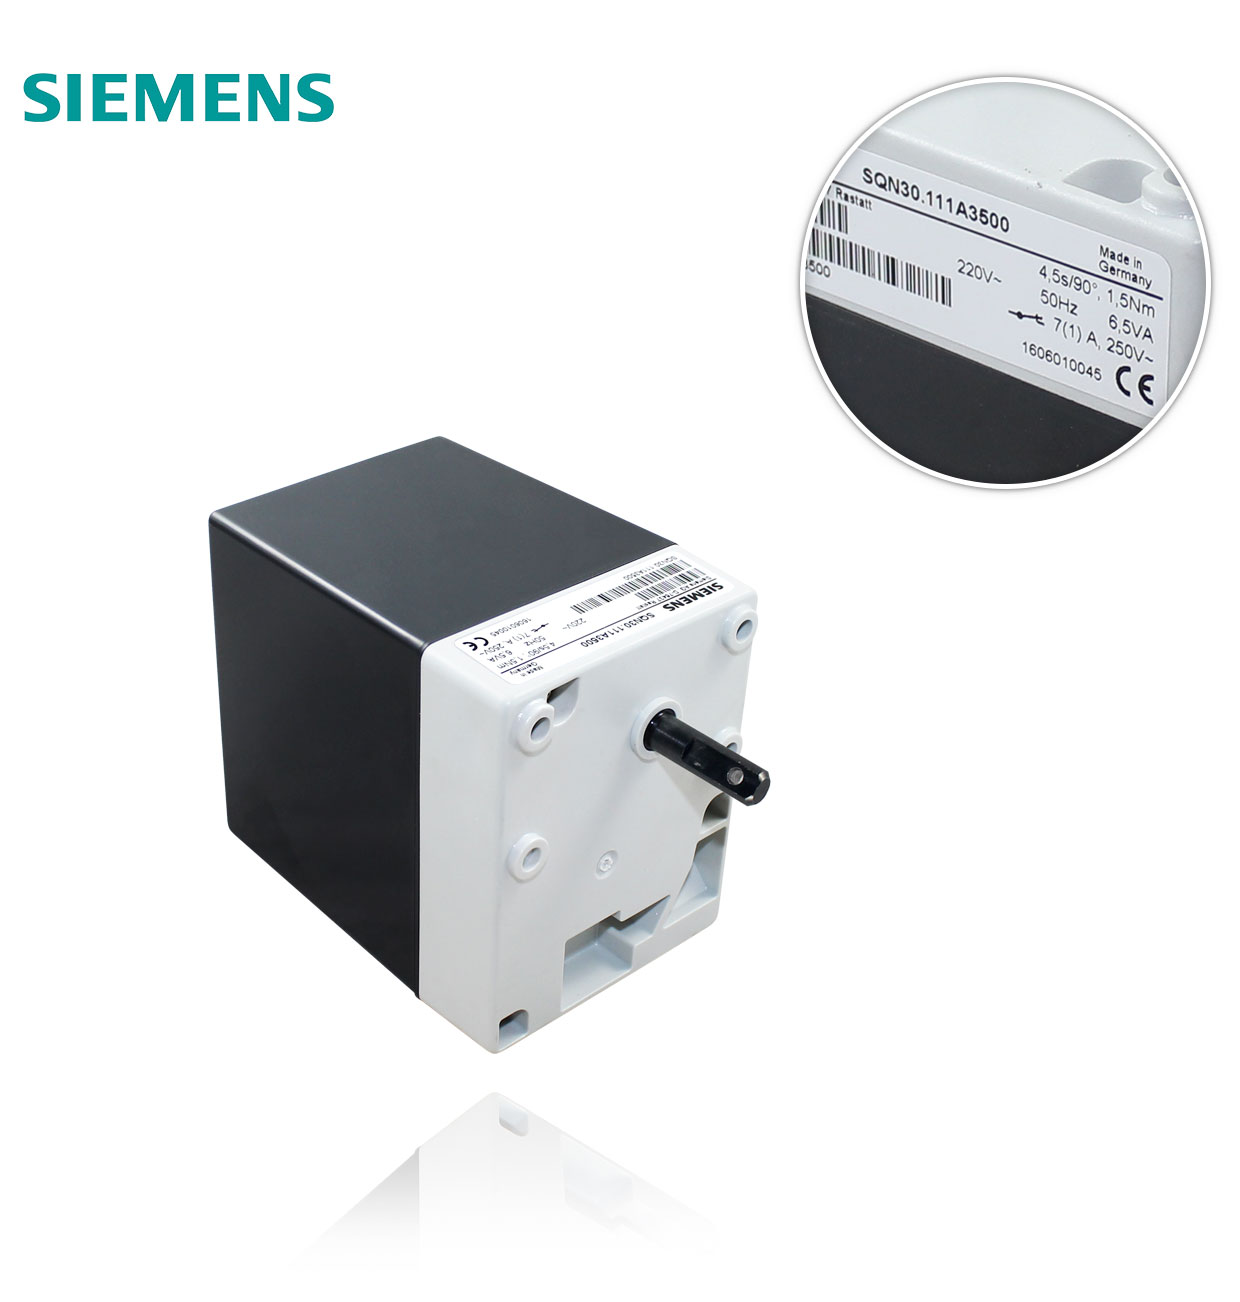 SQN 30.111A3500 (with hole in the shaft) SIEMENS SERVOMOTOR FOR LAMBORGHINI